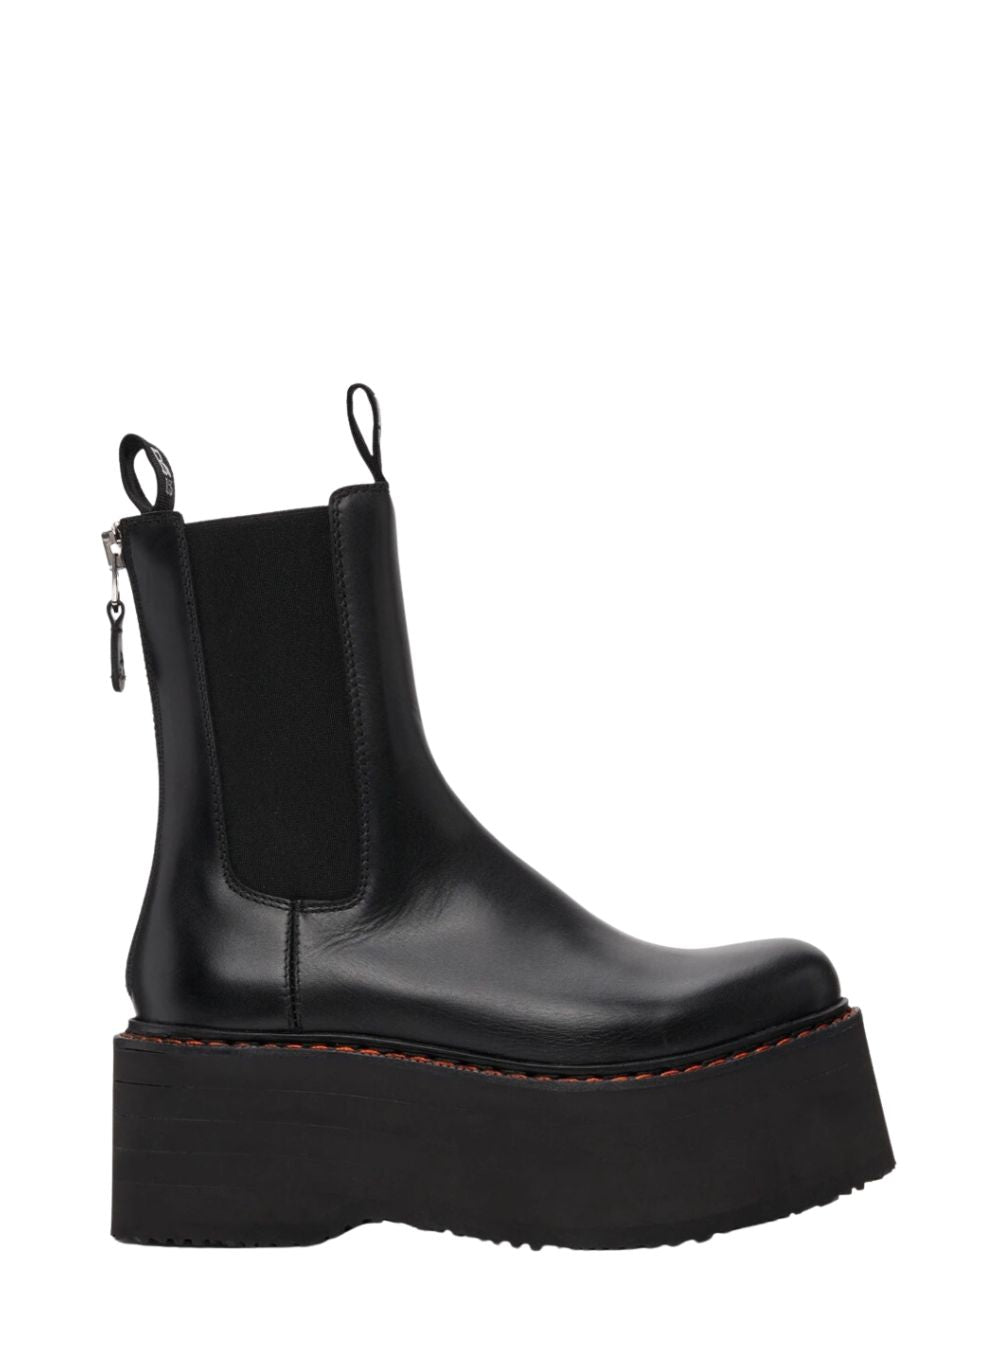 R13 | Double Stack Chelsea Boot